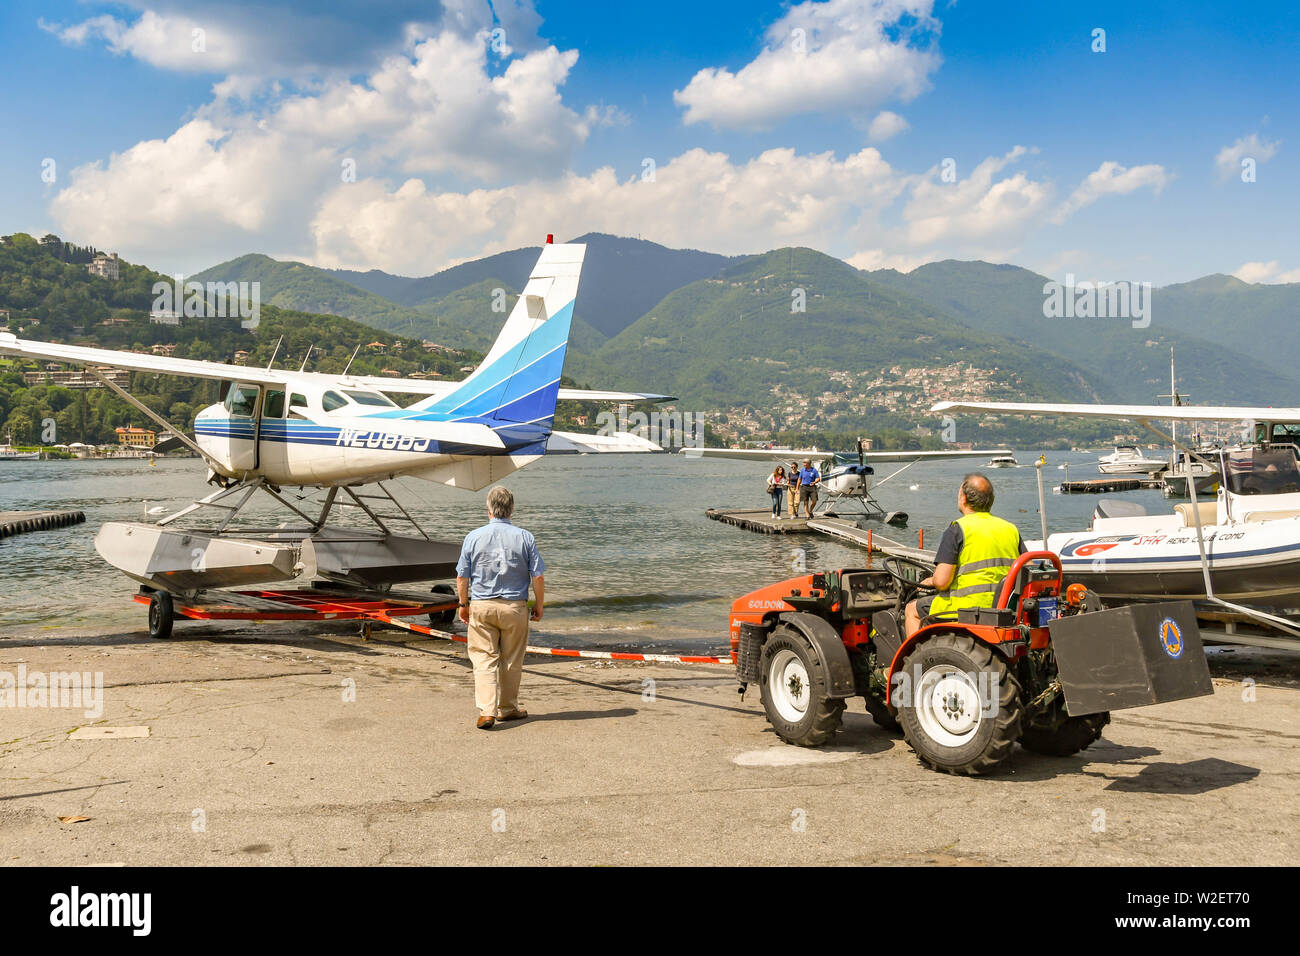 COMO, LAKE COMO, ITALY - JUNE 2019: Float plane operated by the Aero Club Como being pushed by a small tractor into the waters of Lake Como Stock Photo